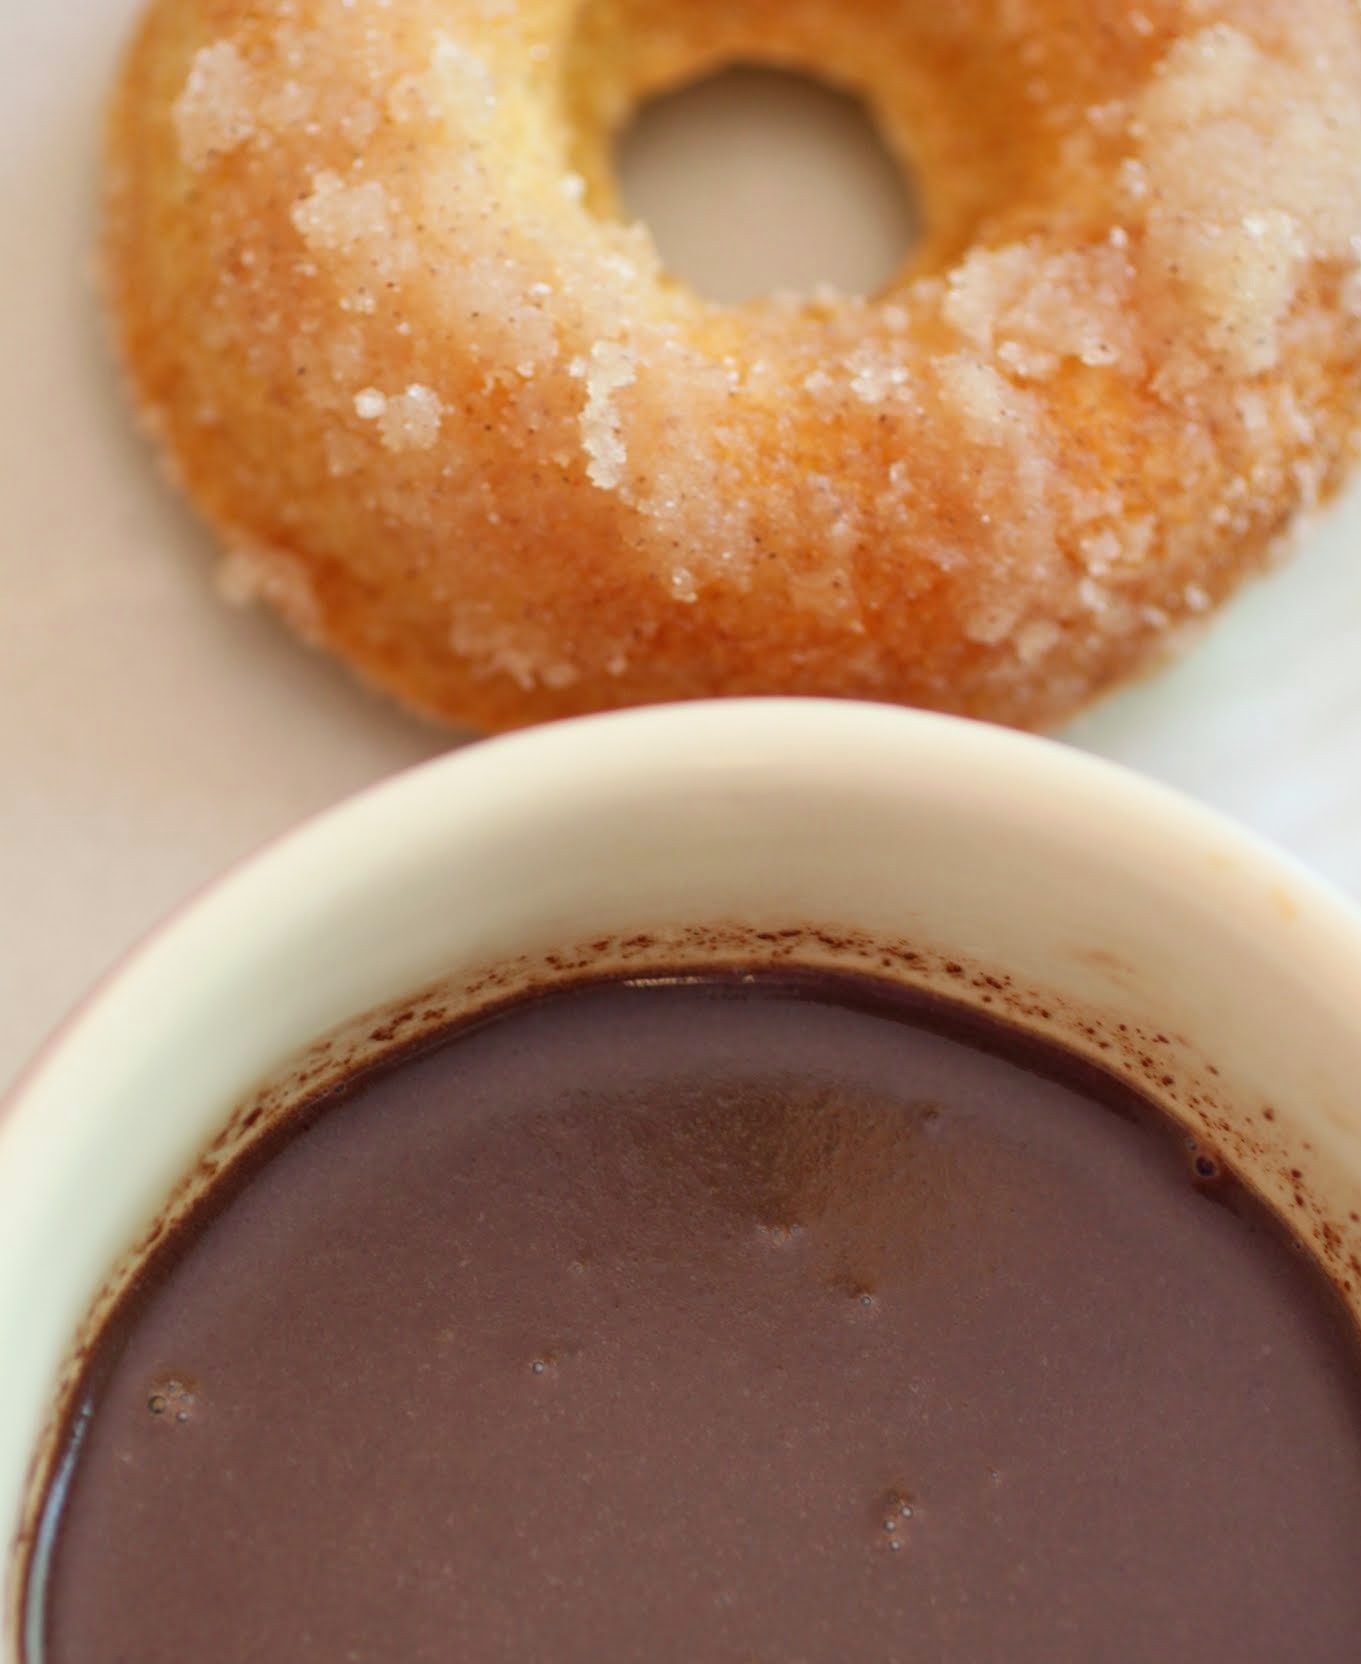 Cinnamon Donuts with Chocolate Dipping Sauce